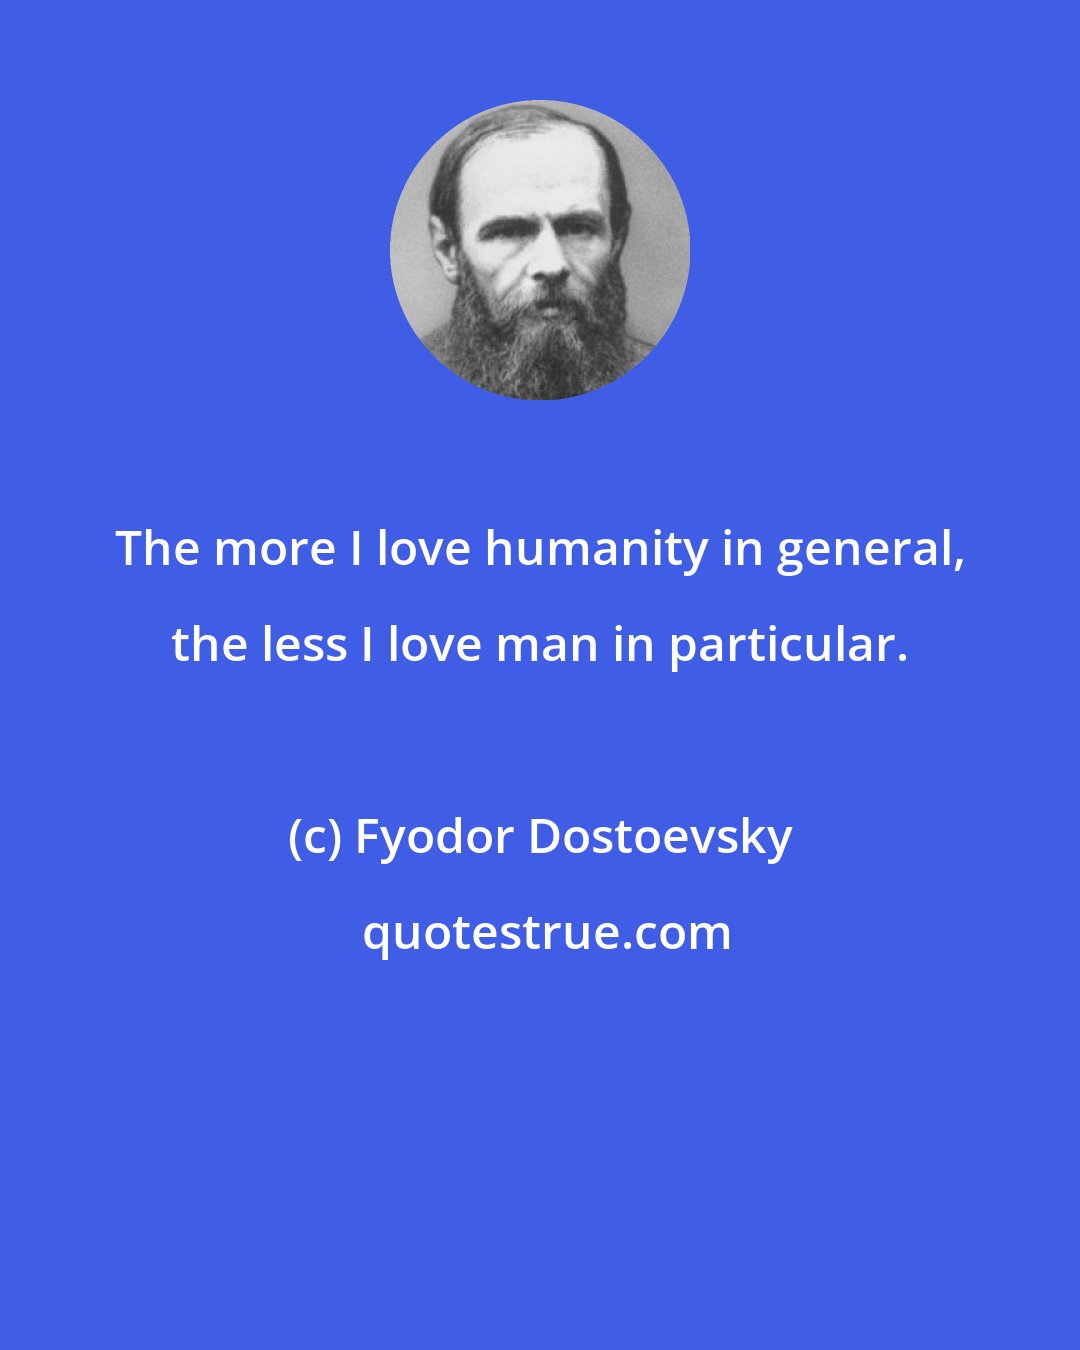 Fyodor Dostoevsky: The more I love humanity in general, the less I love man in particular.